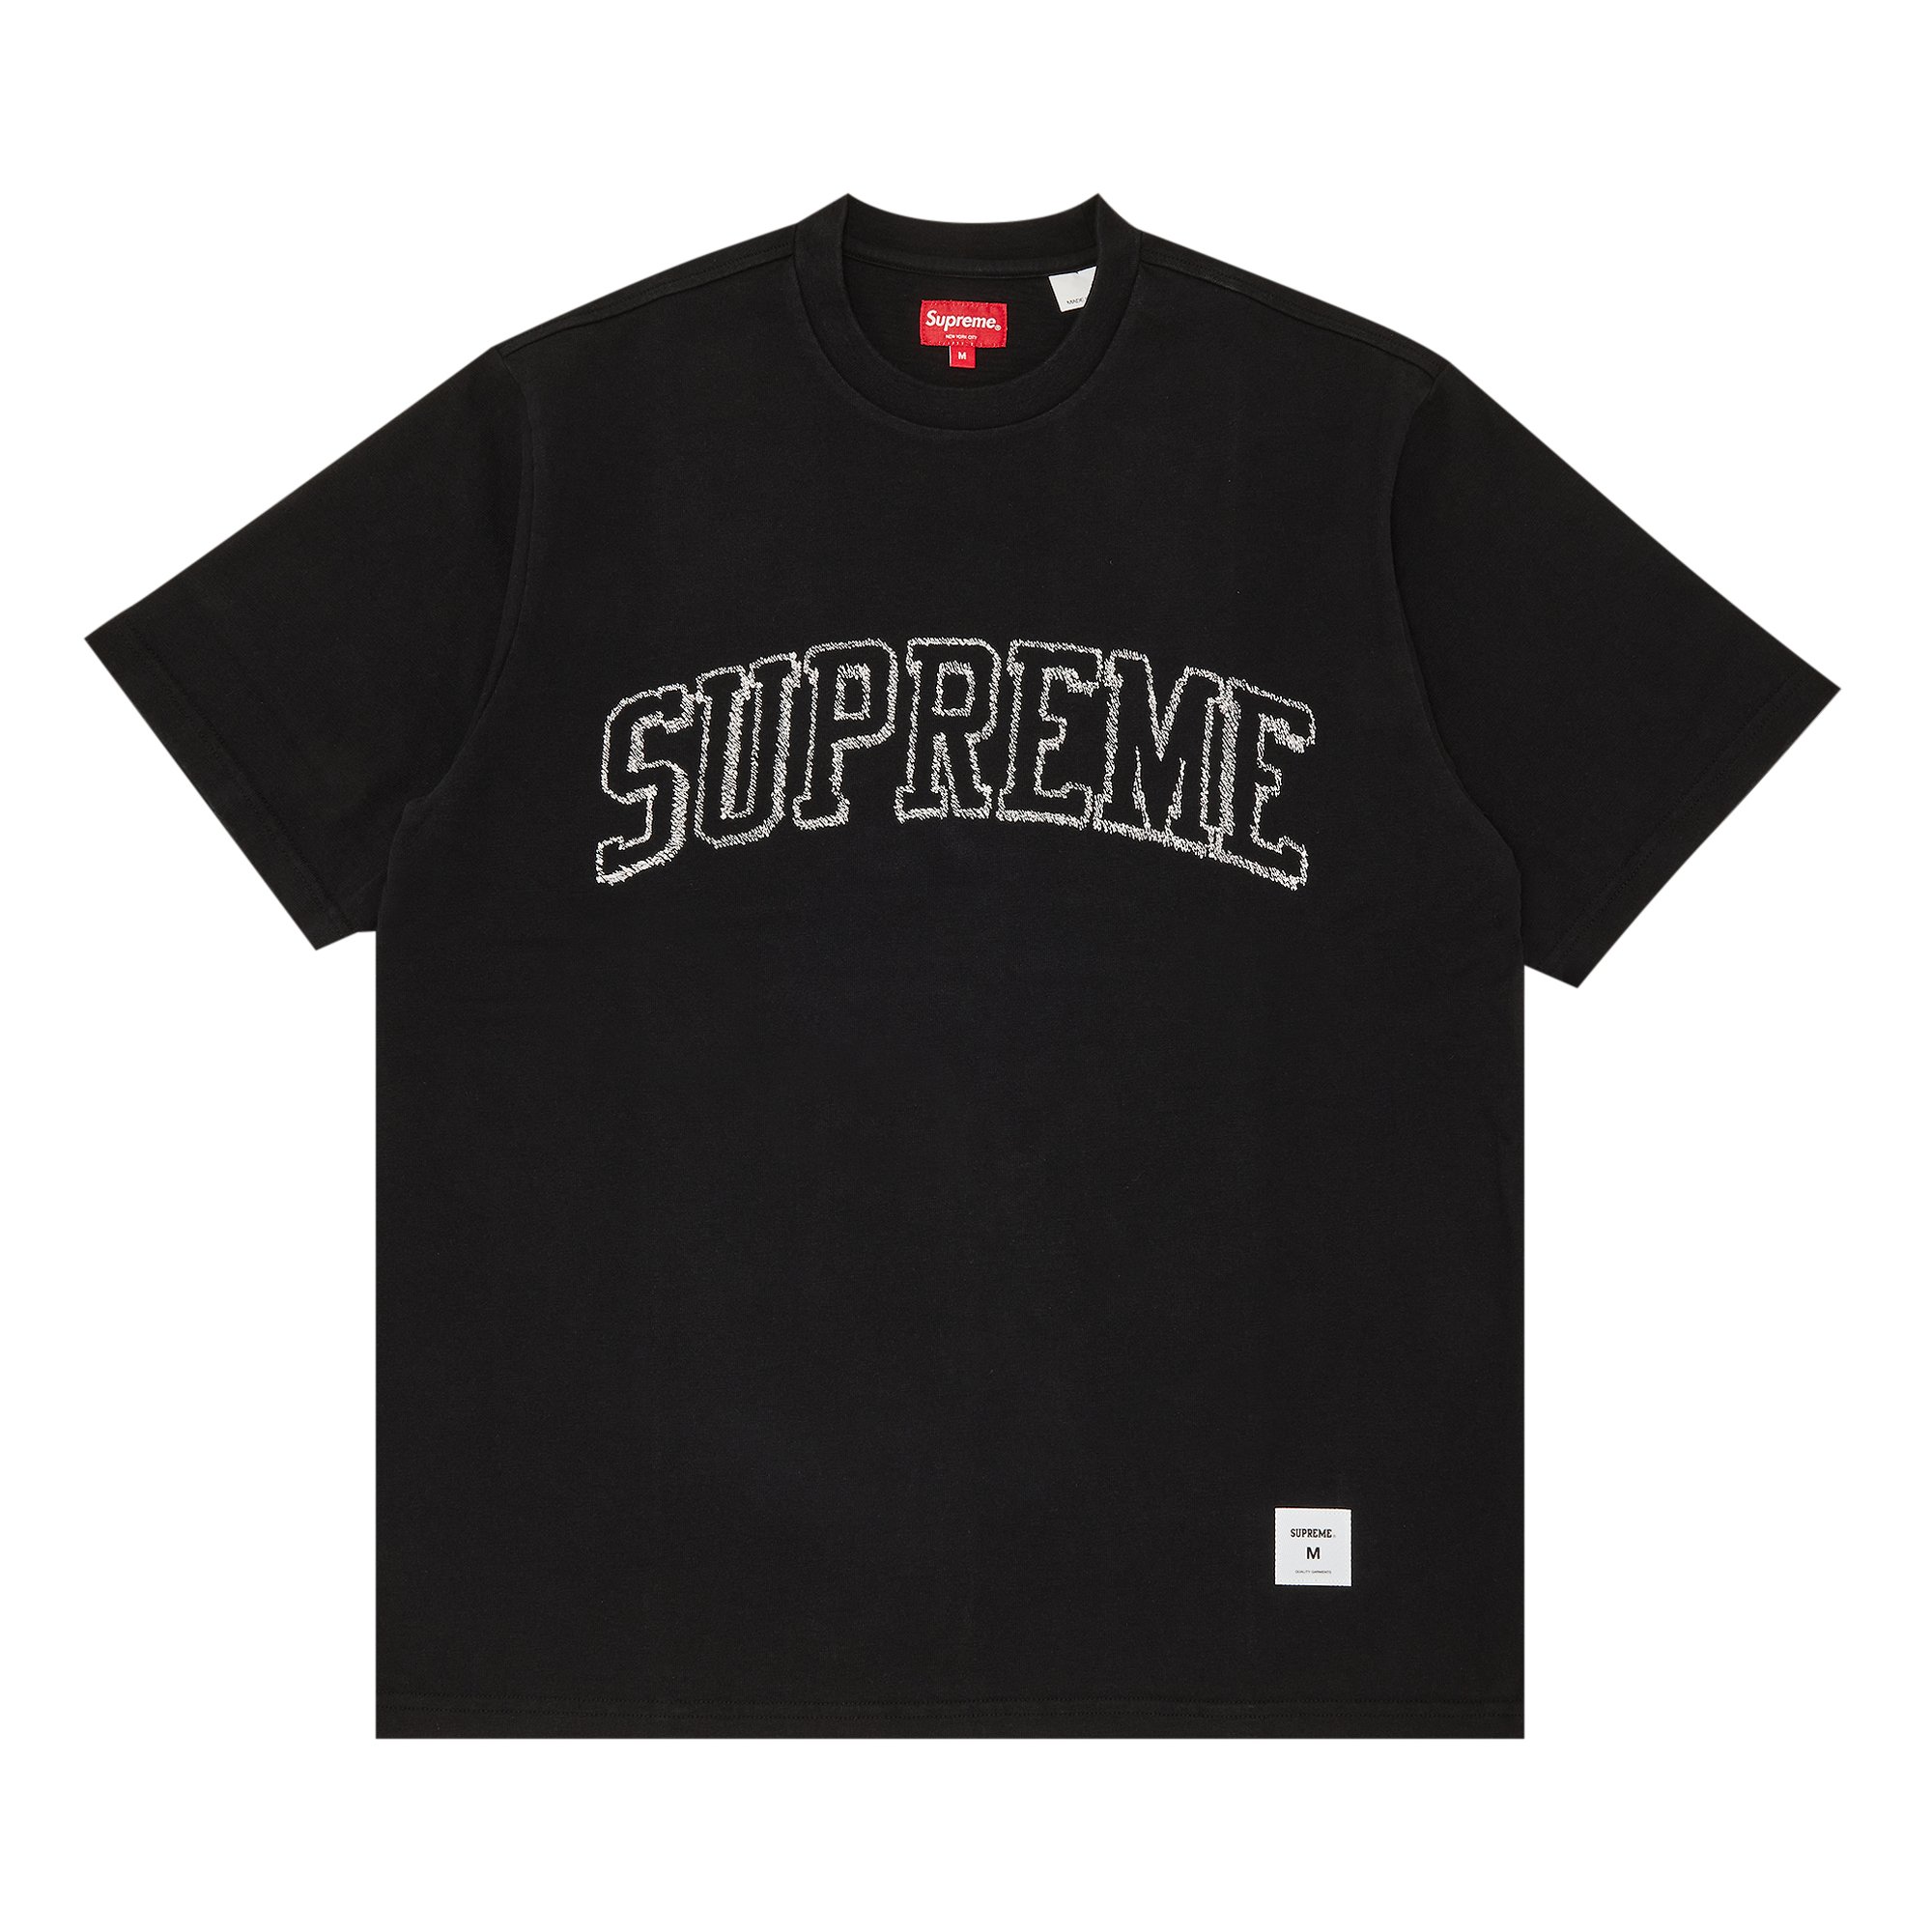 Tシャツ新品未使用タグ付きsupreme Sketch Embroidered Tシャツ